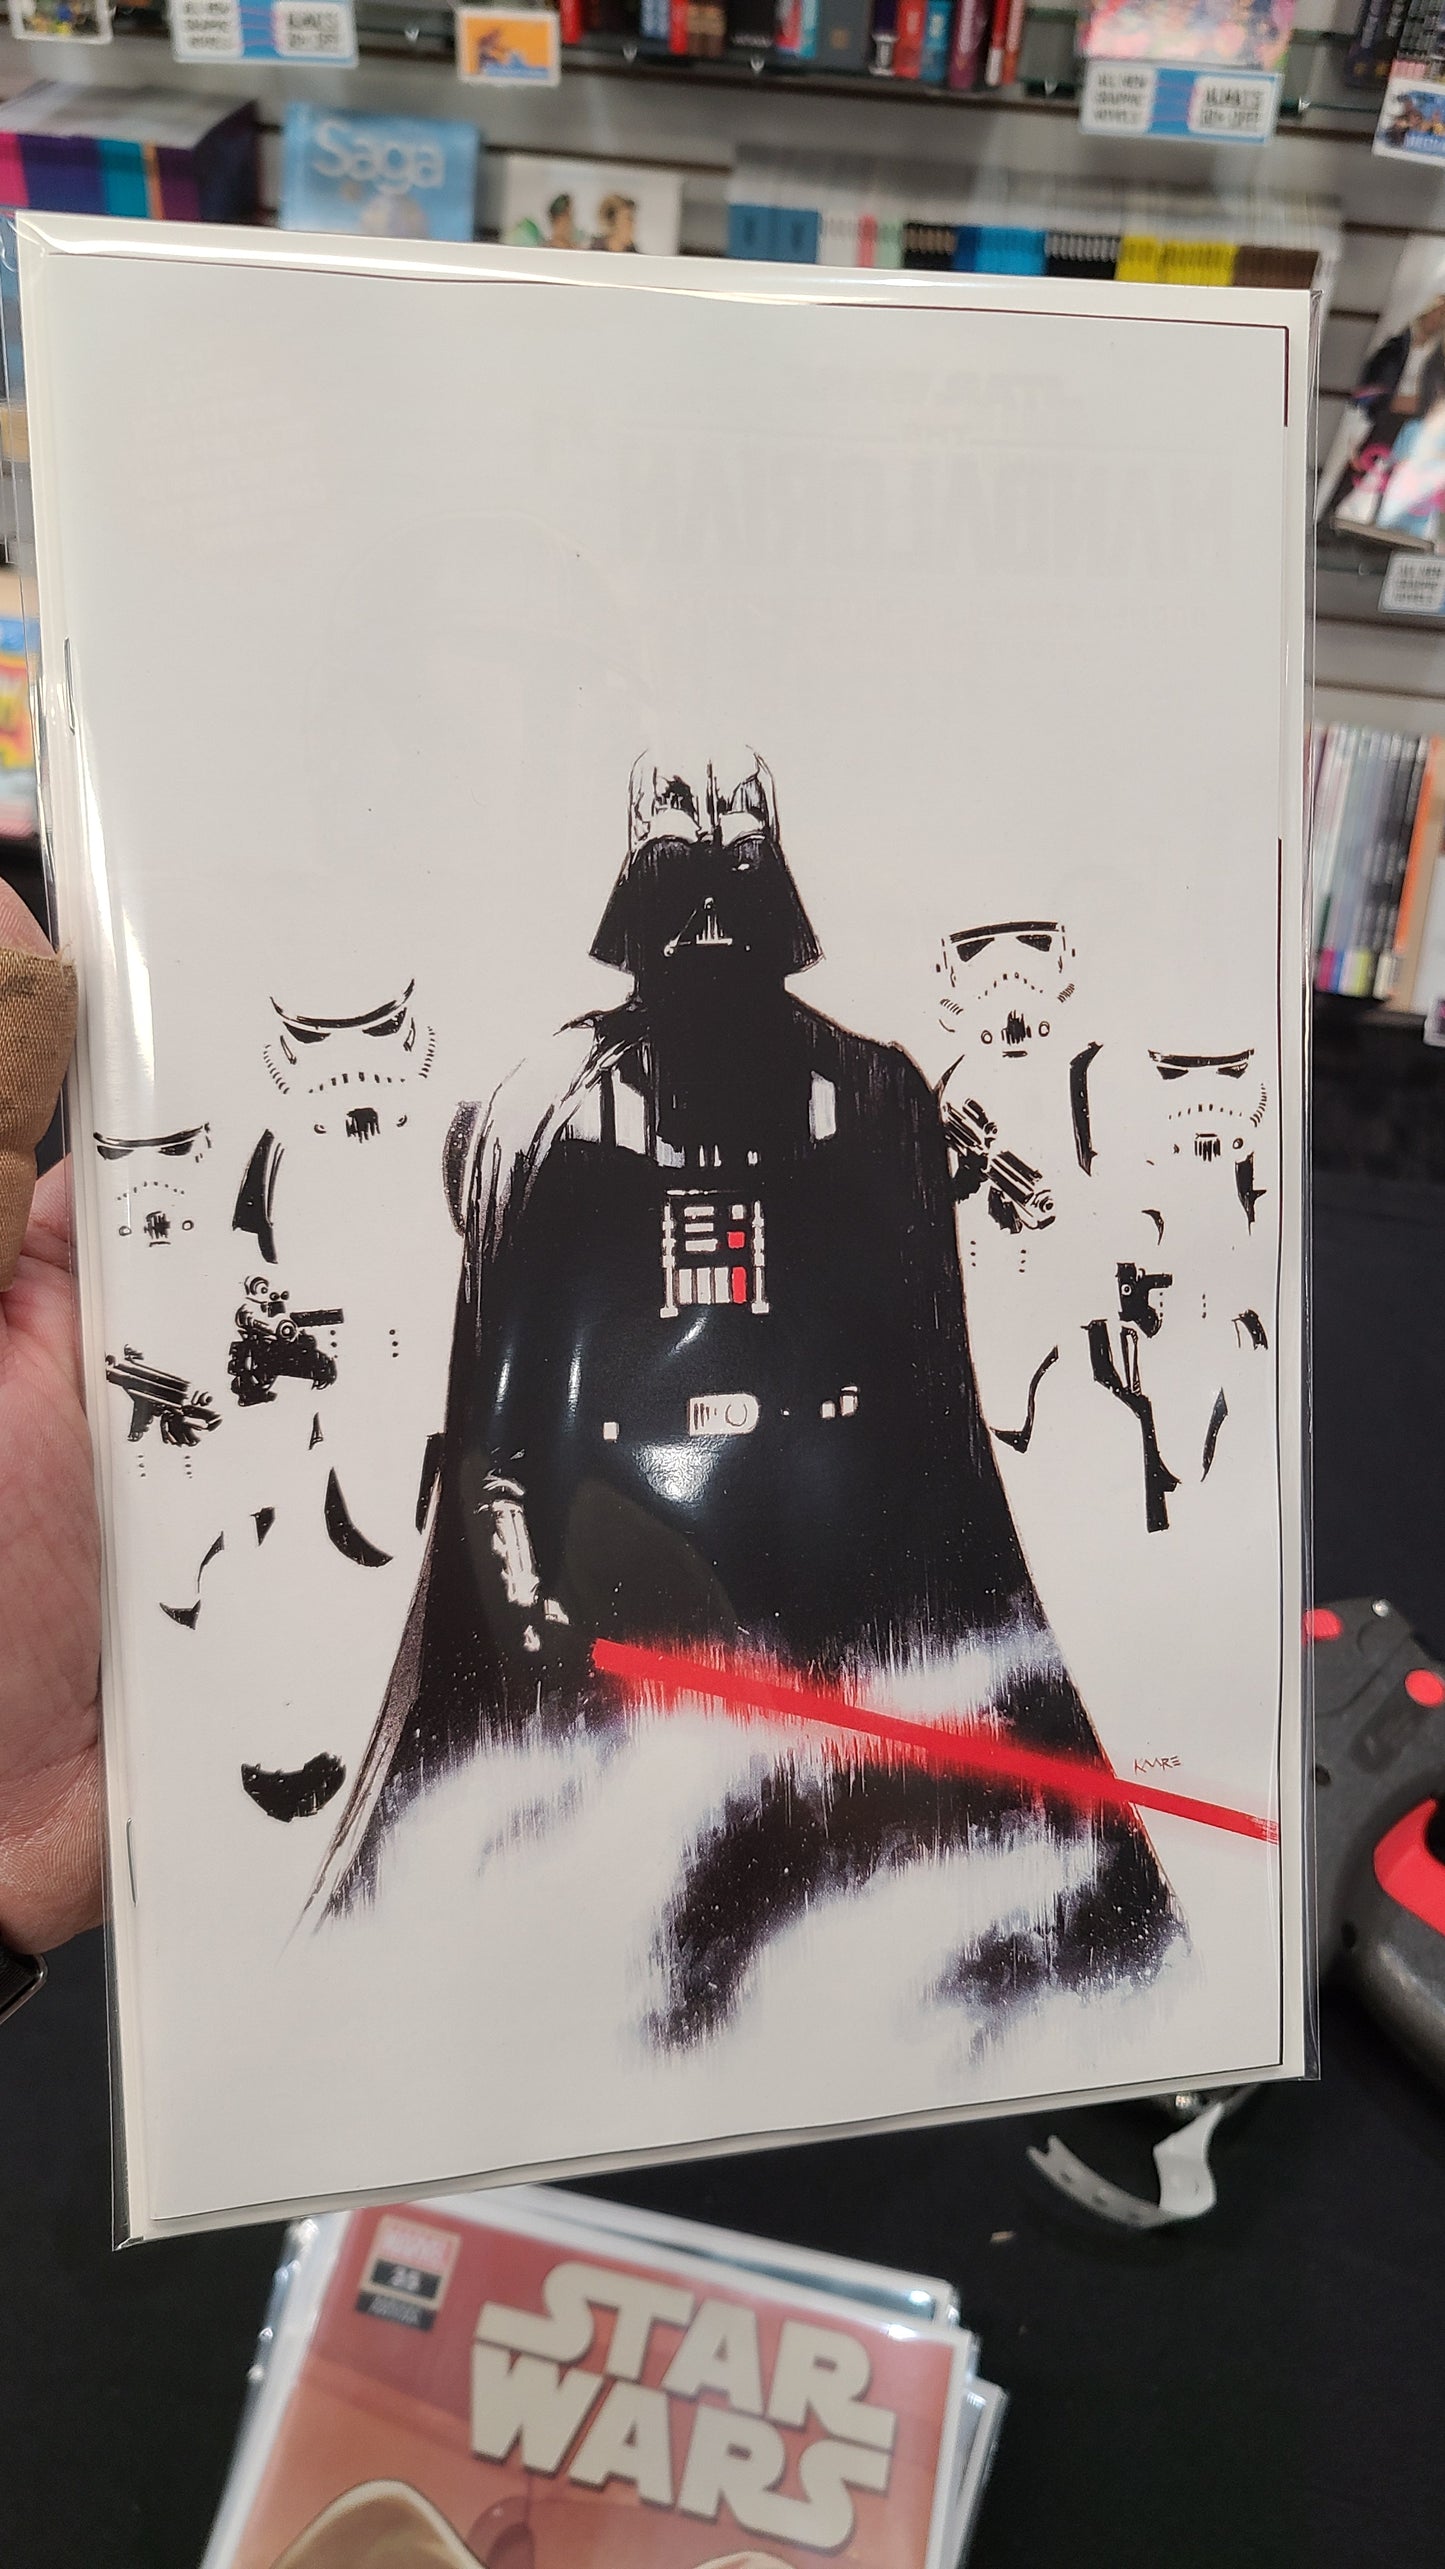 STAR WARS DARTH VADER: BLACK, WHITE, AND RED #1 2ND PRINTING 1:25 by KAARE ANDREWS